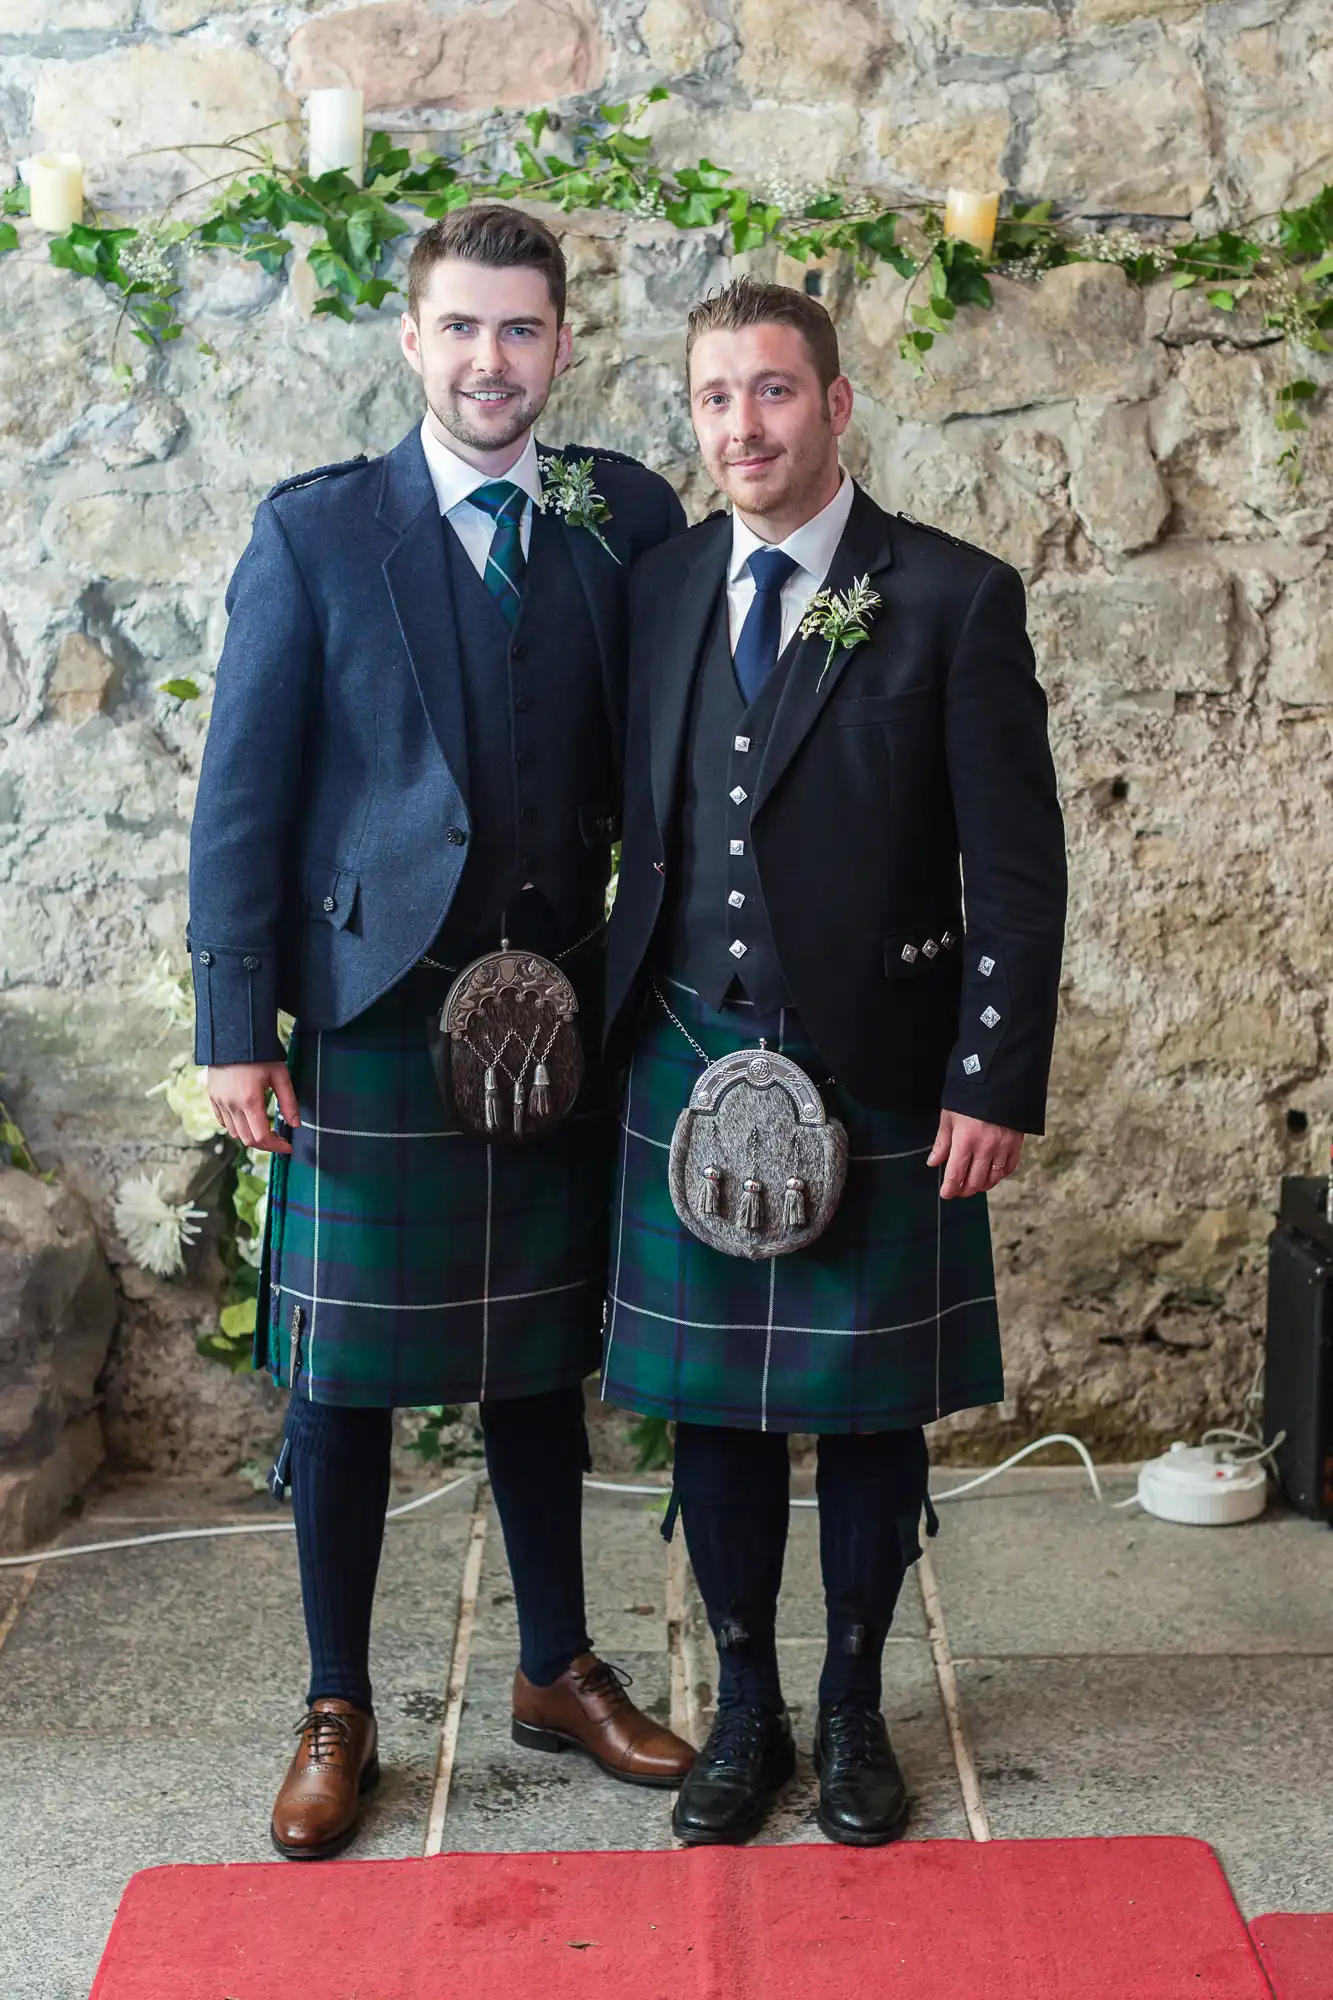 Two men in traditional scottish kilts and jackets standing together at an event, smiling for the camera.